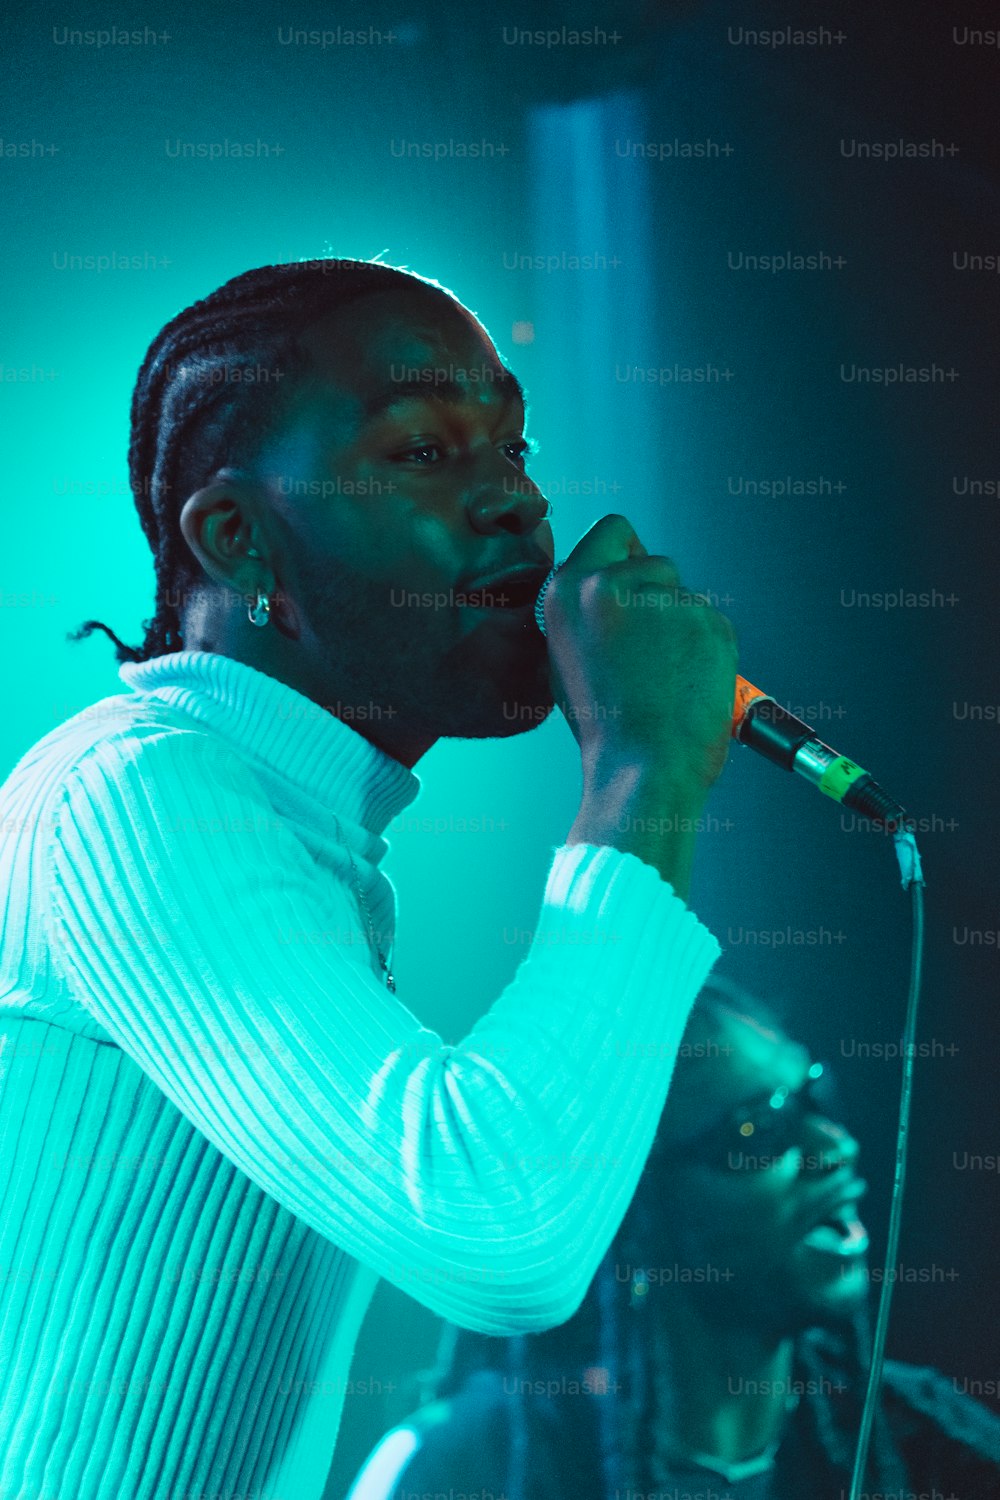 a man with dreadlocks singing into a microphone